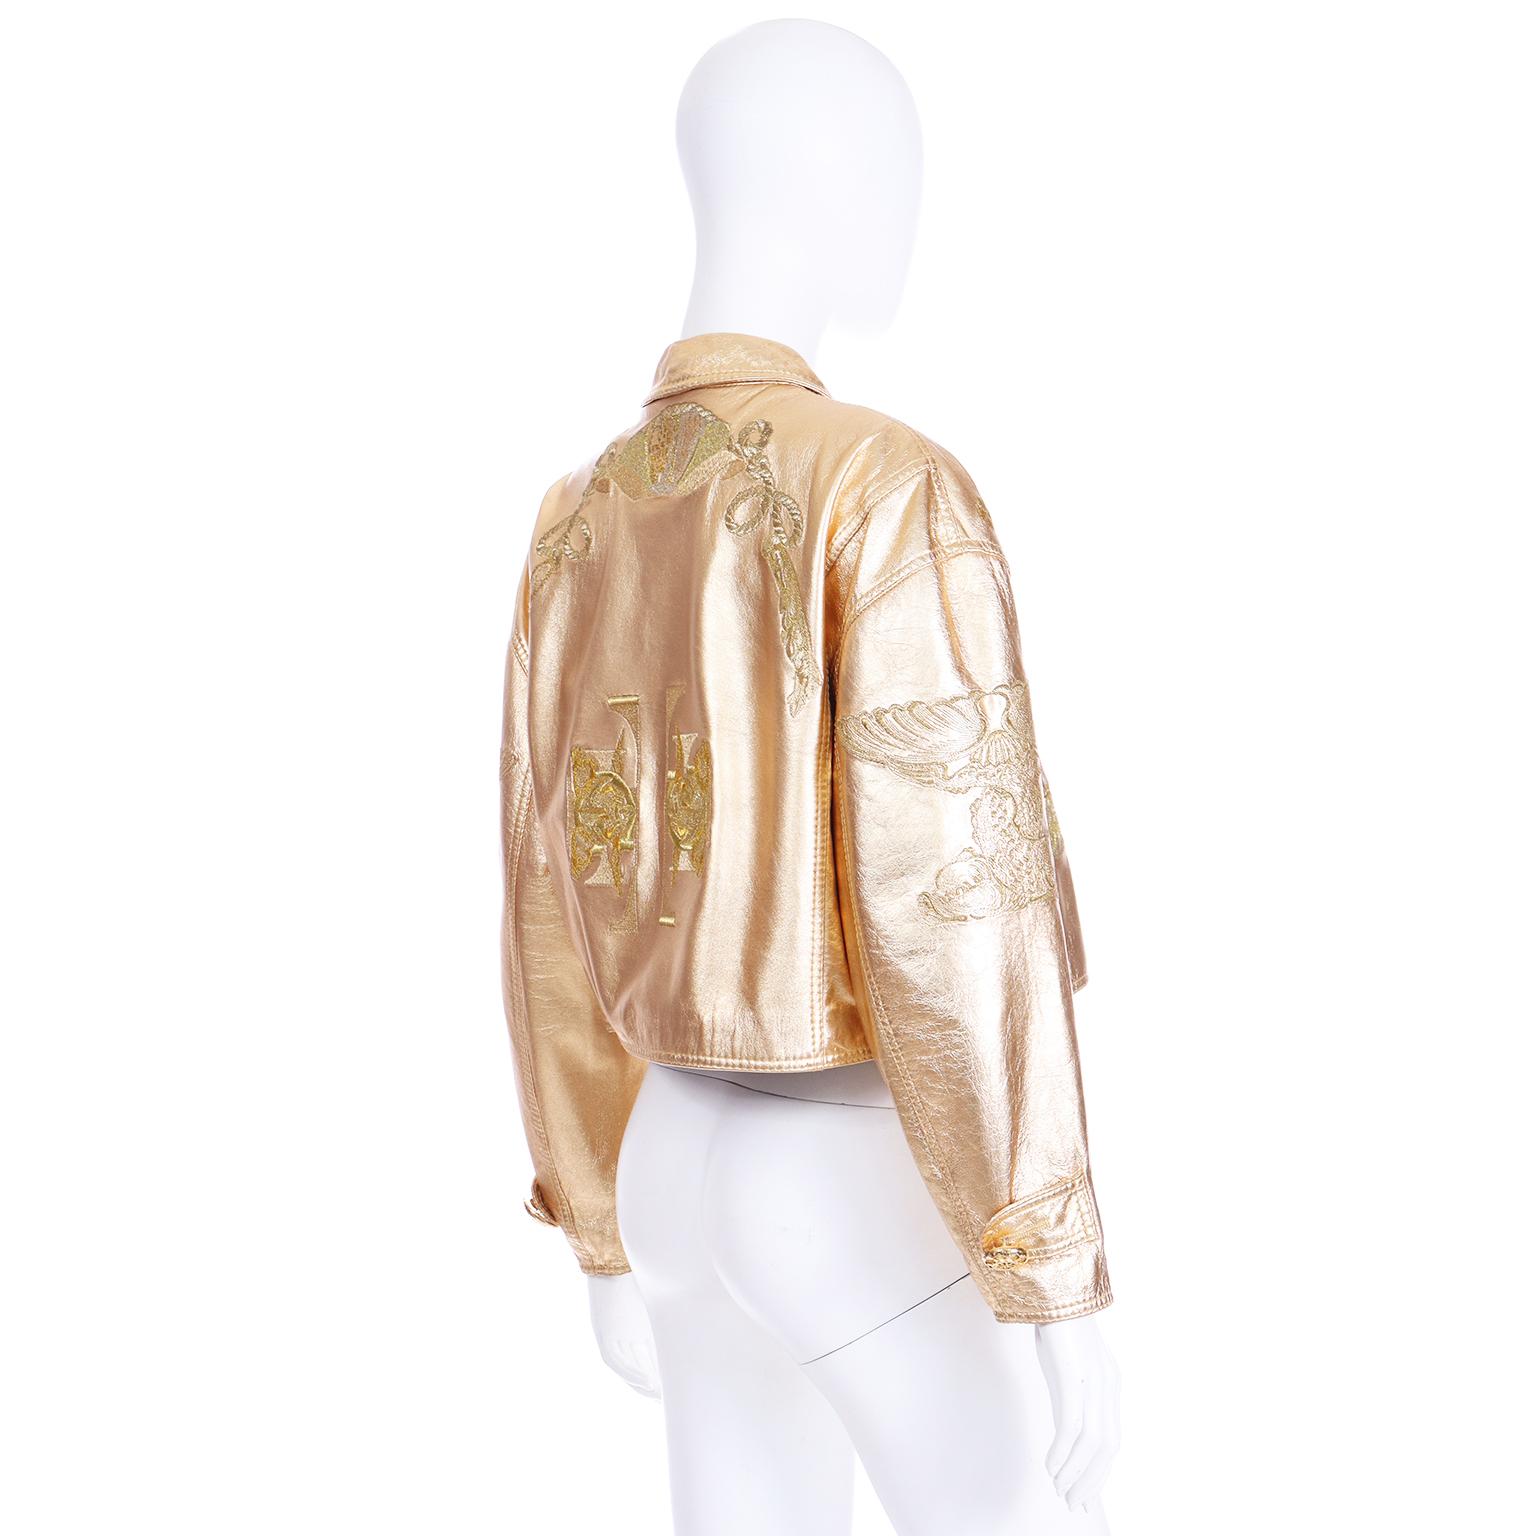 Gianfranco Ferre S/S 1992 Runway Gold Leather Embroidered Ocean Theme Jacket In Excellent Condition For Sale In Portland, OR